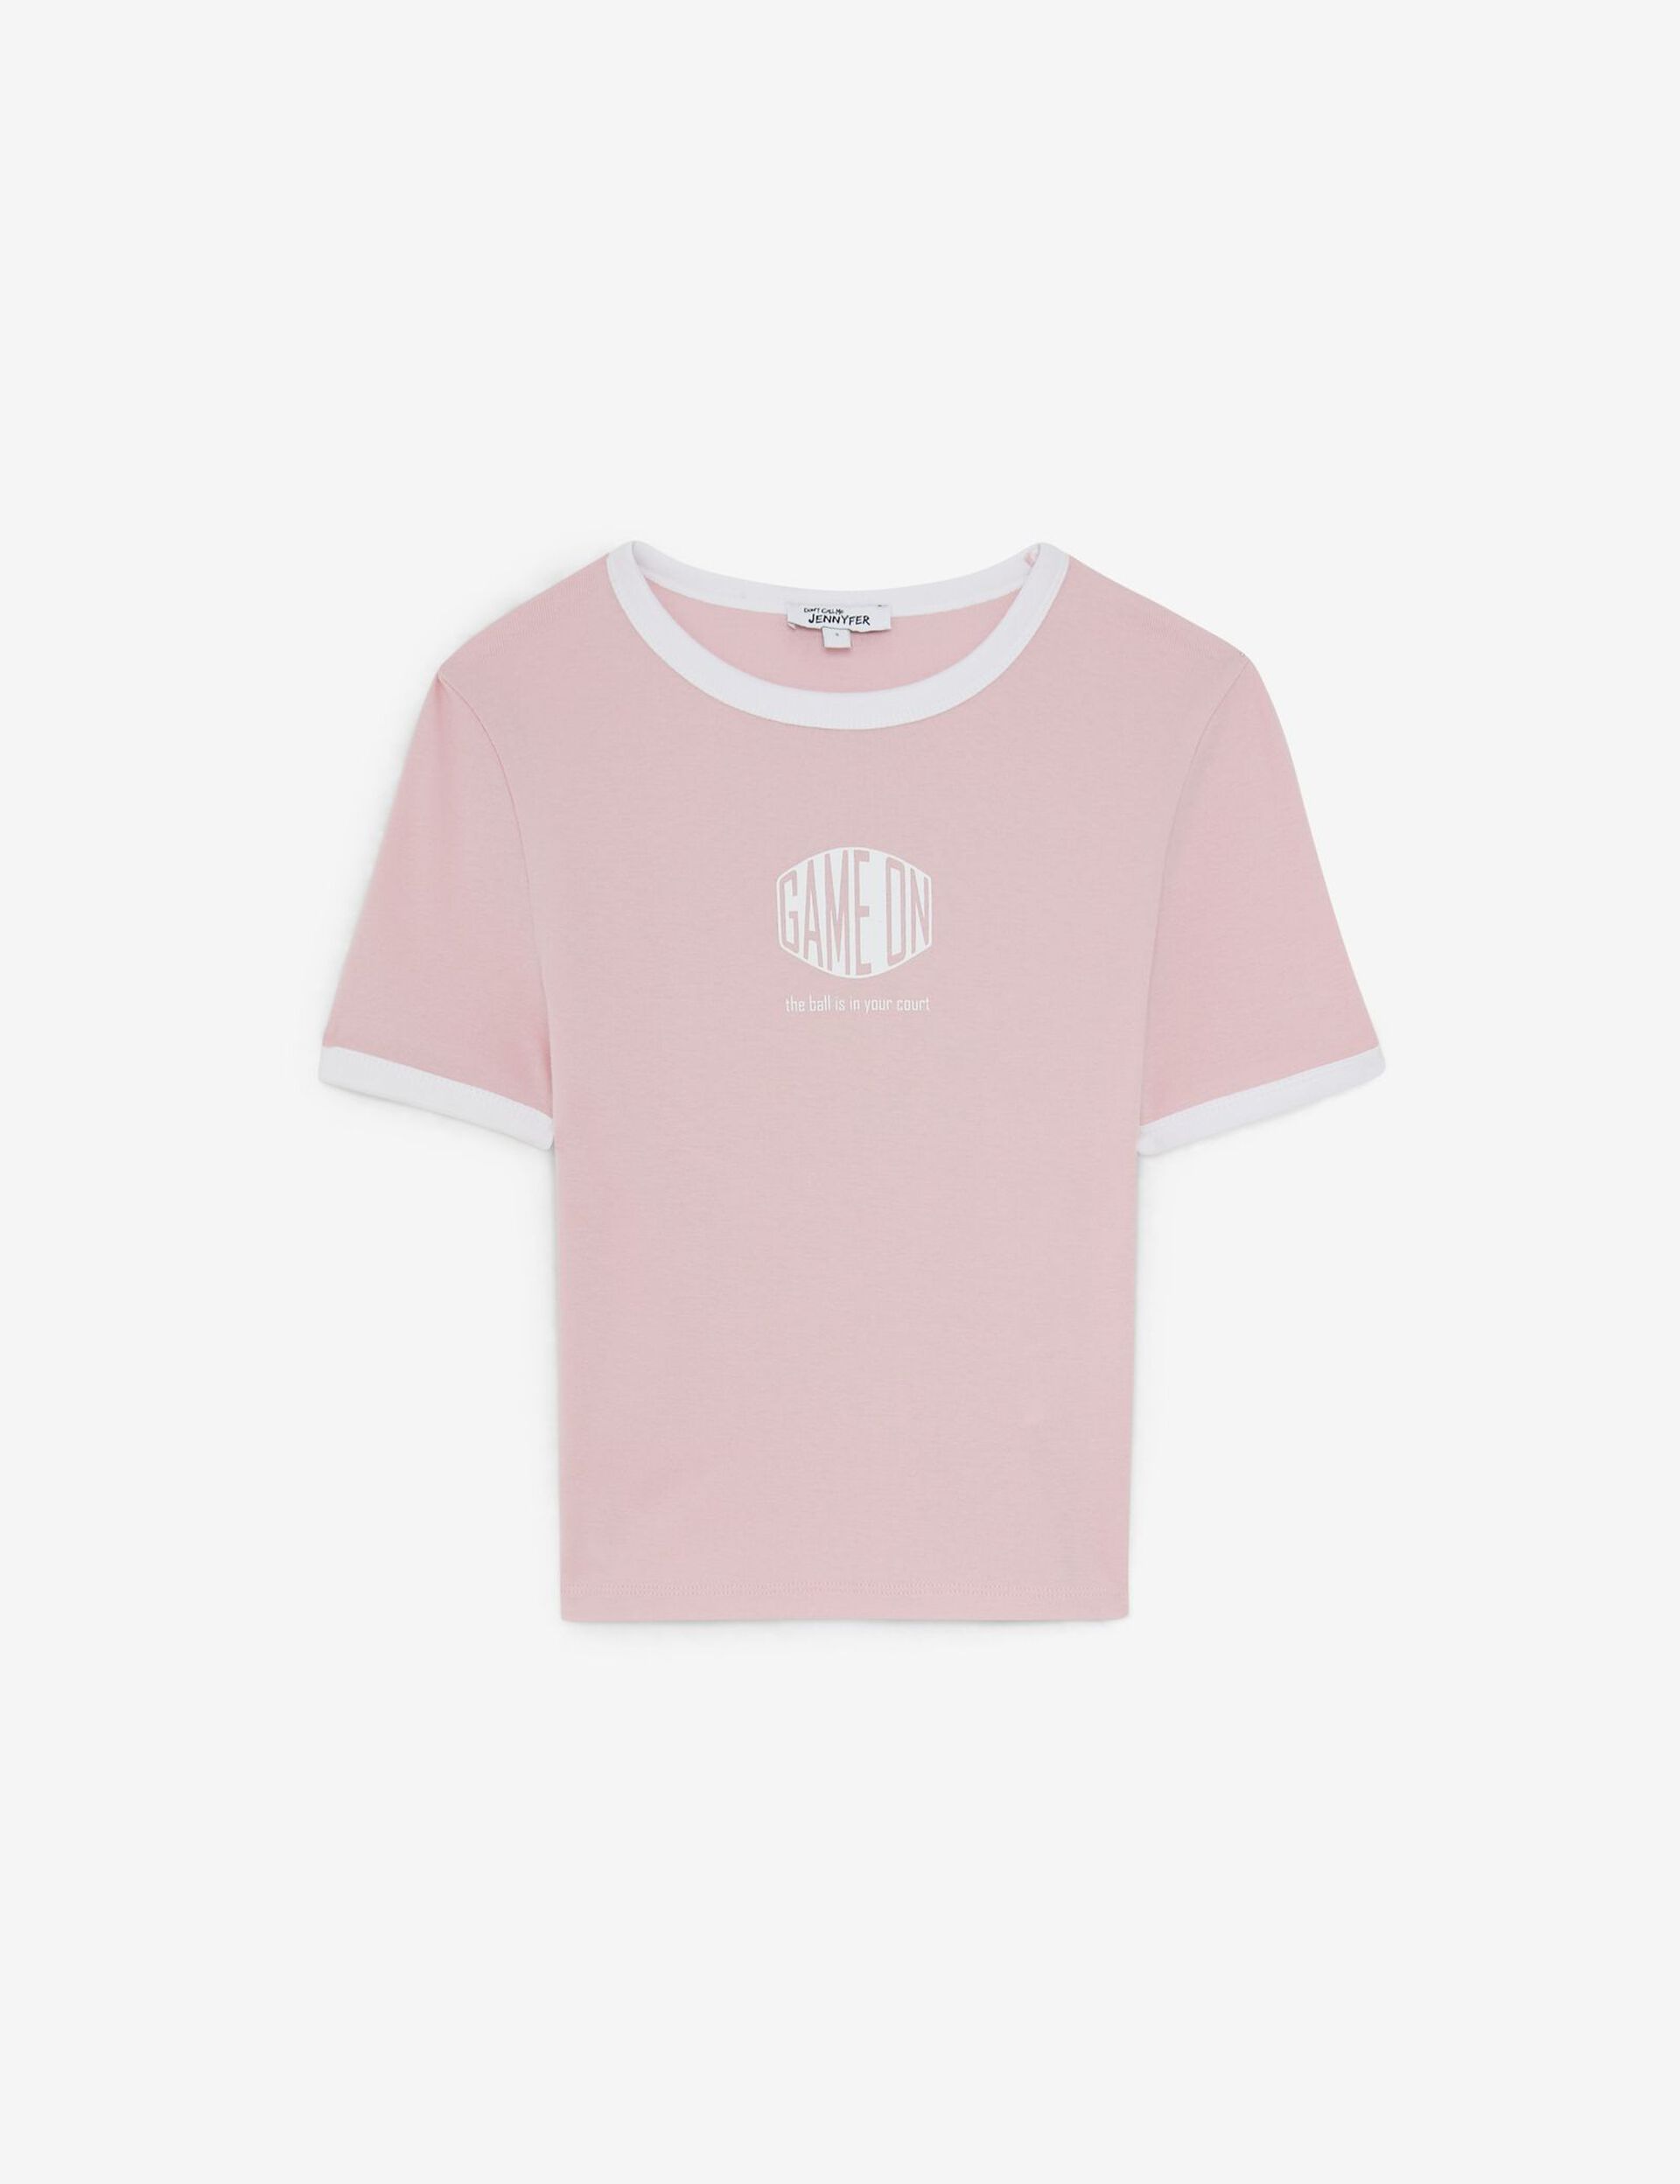 Tee-shirt court à message rose finitions blanches